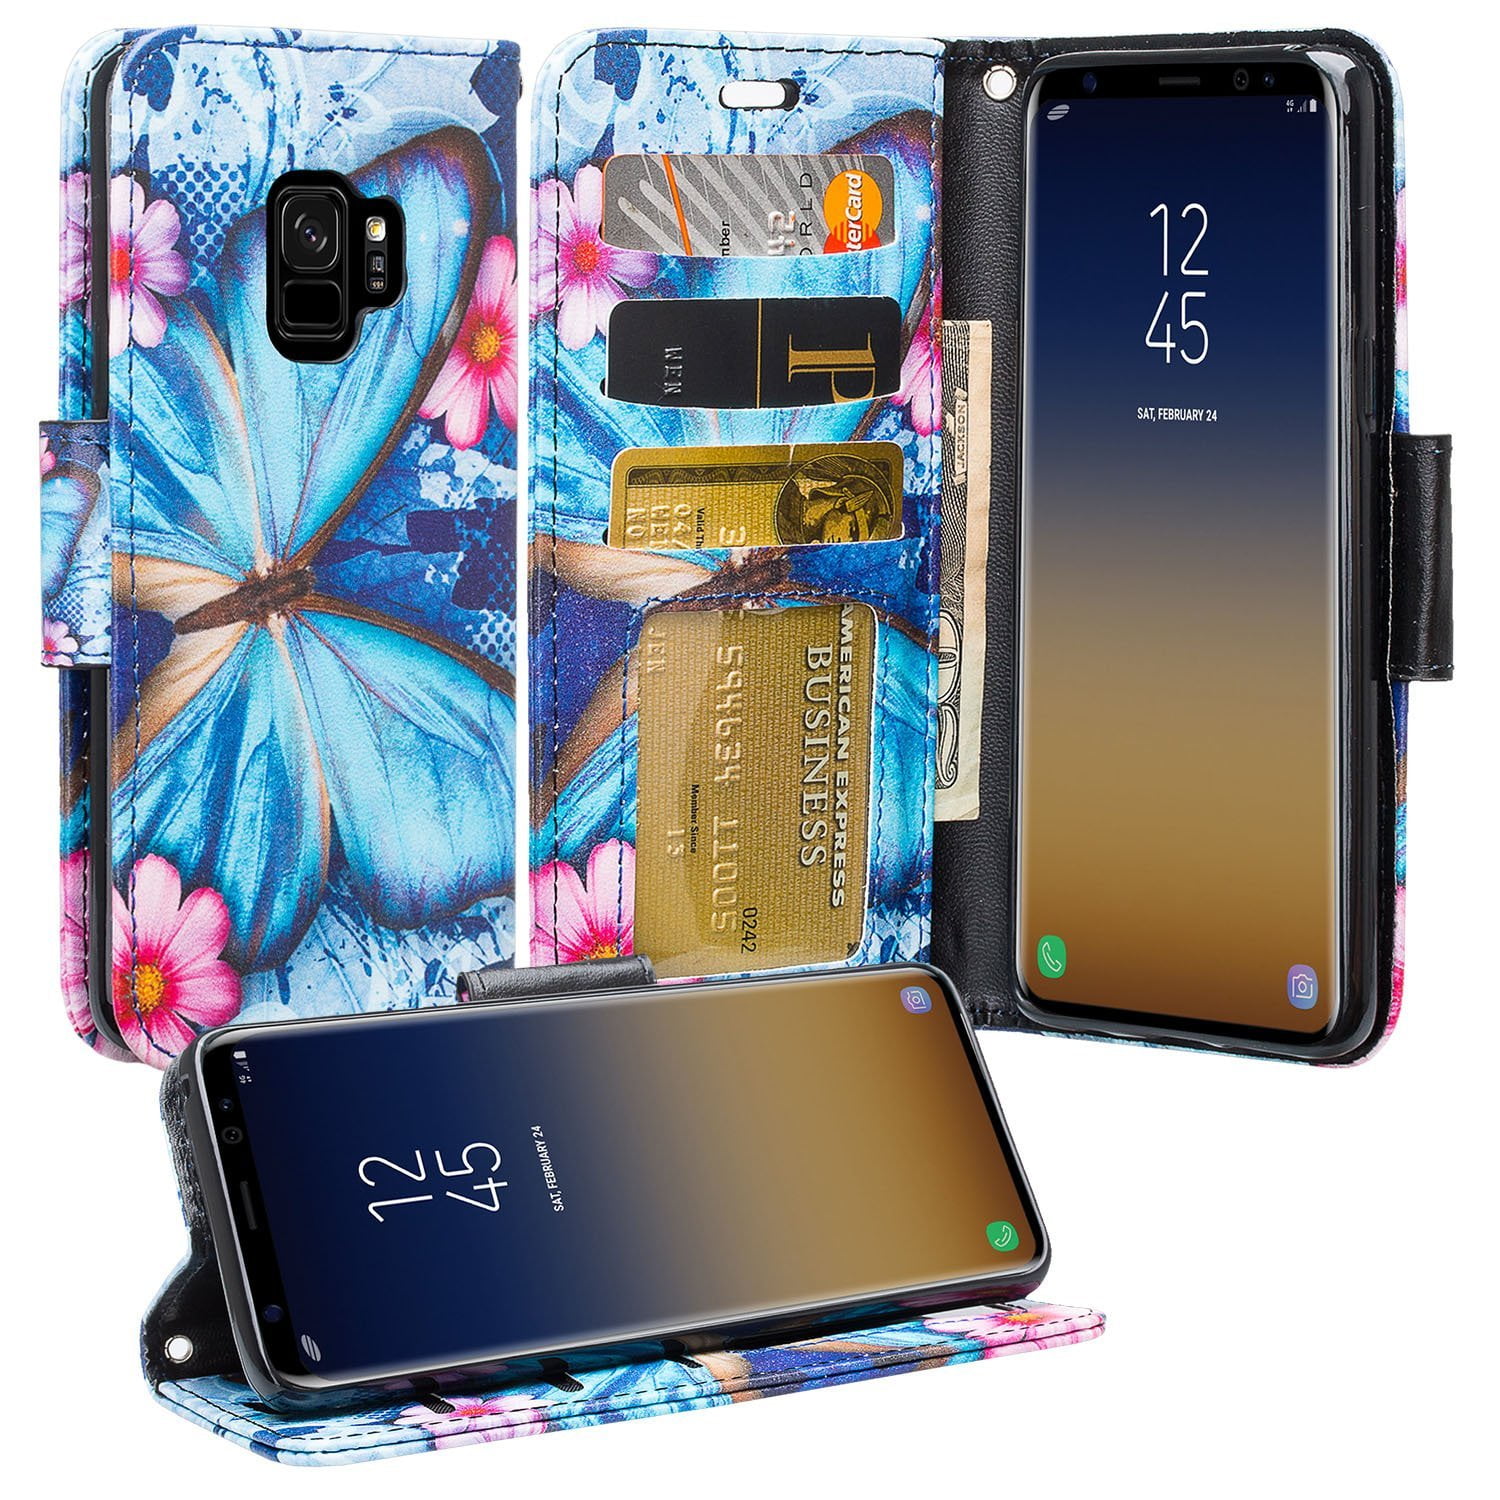 Butterfly Pattern Leather Flip Wallet Cover Protective Cases for Samsung Galaxy S9 Plus Purple iDoer S9 Plus Case